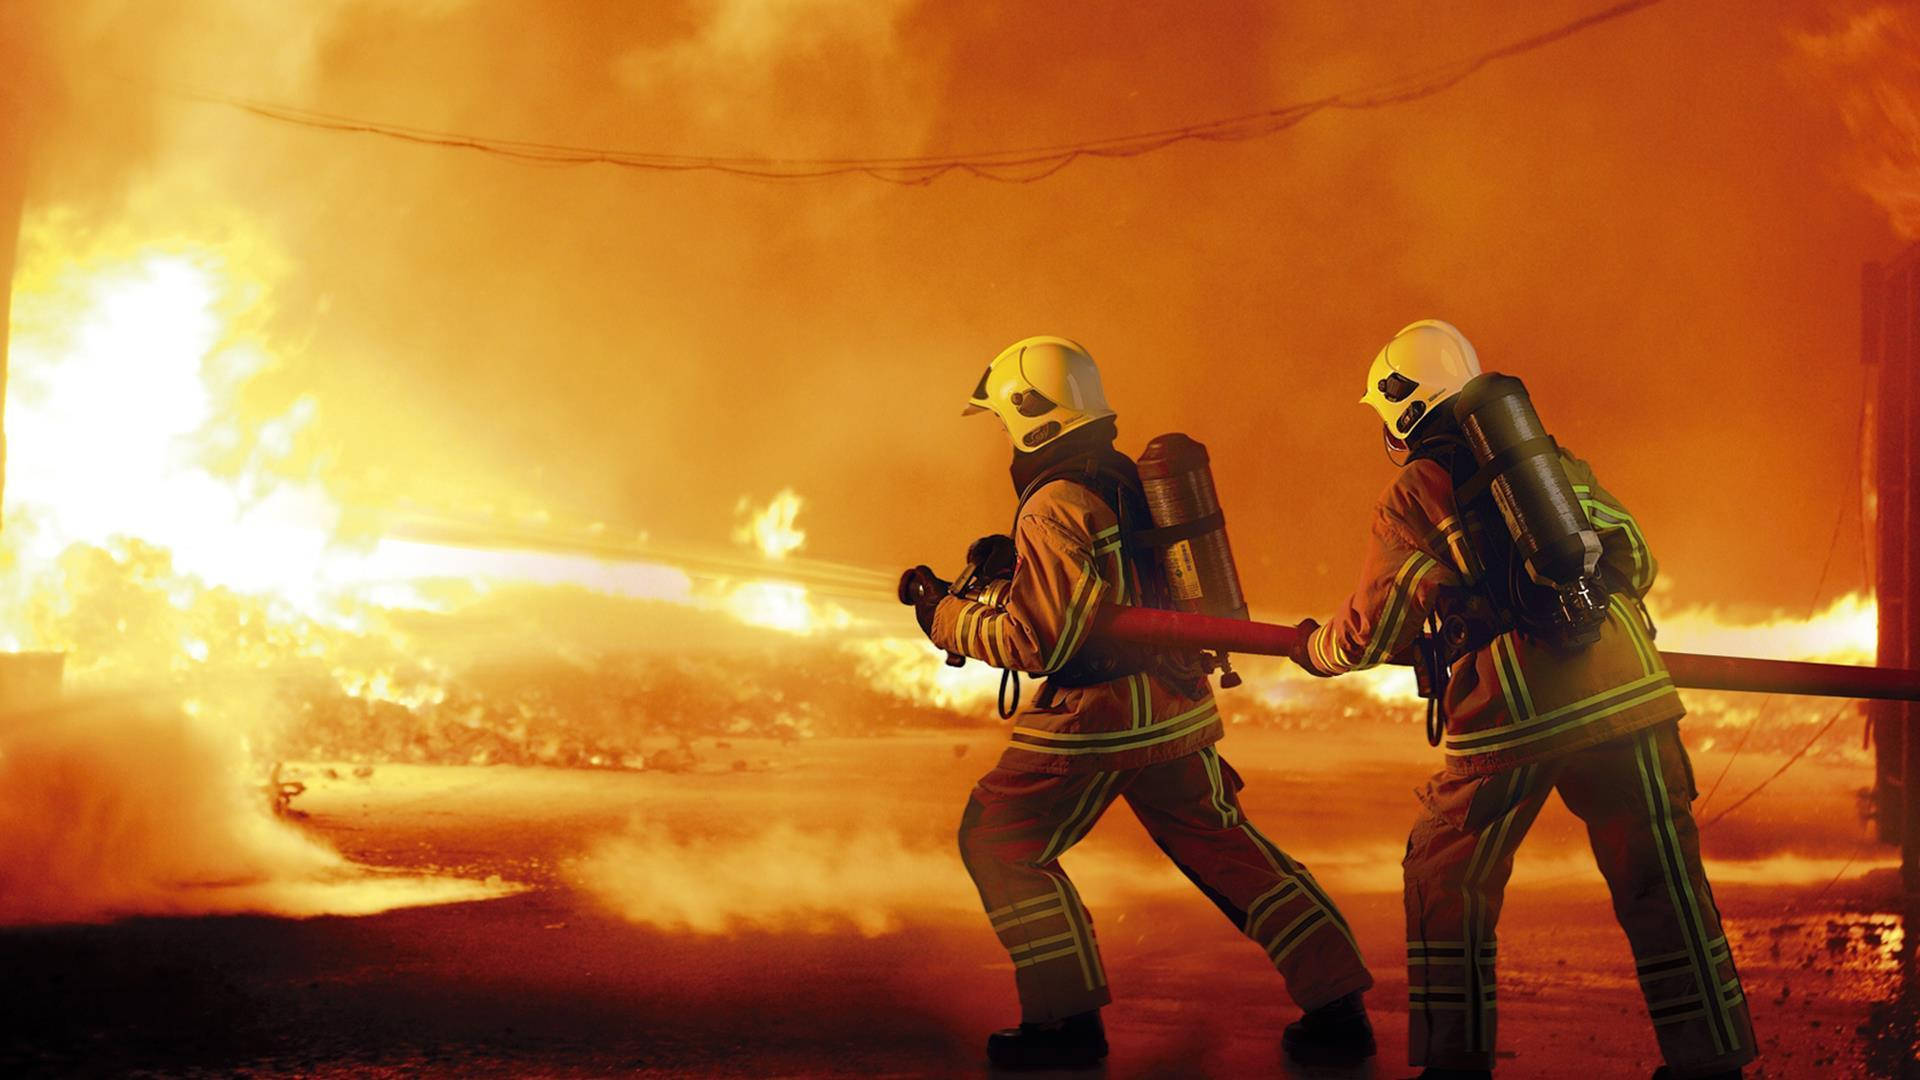 Firefighters With Brave Souls Background